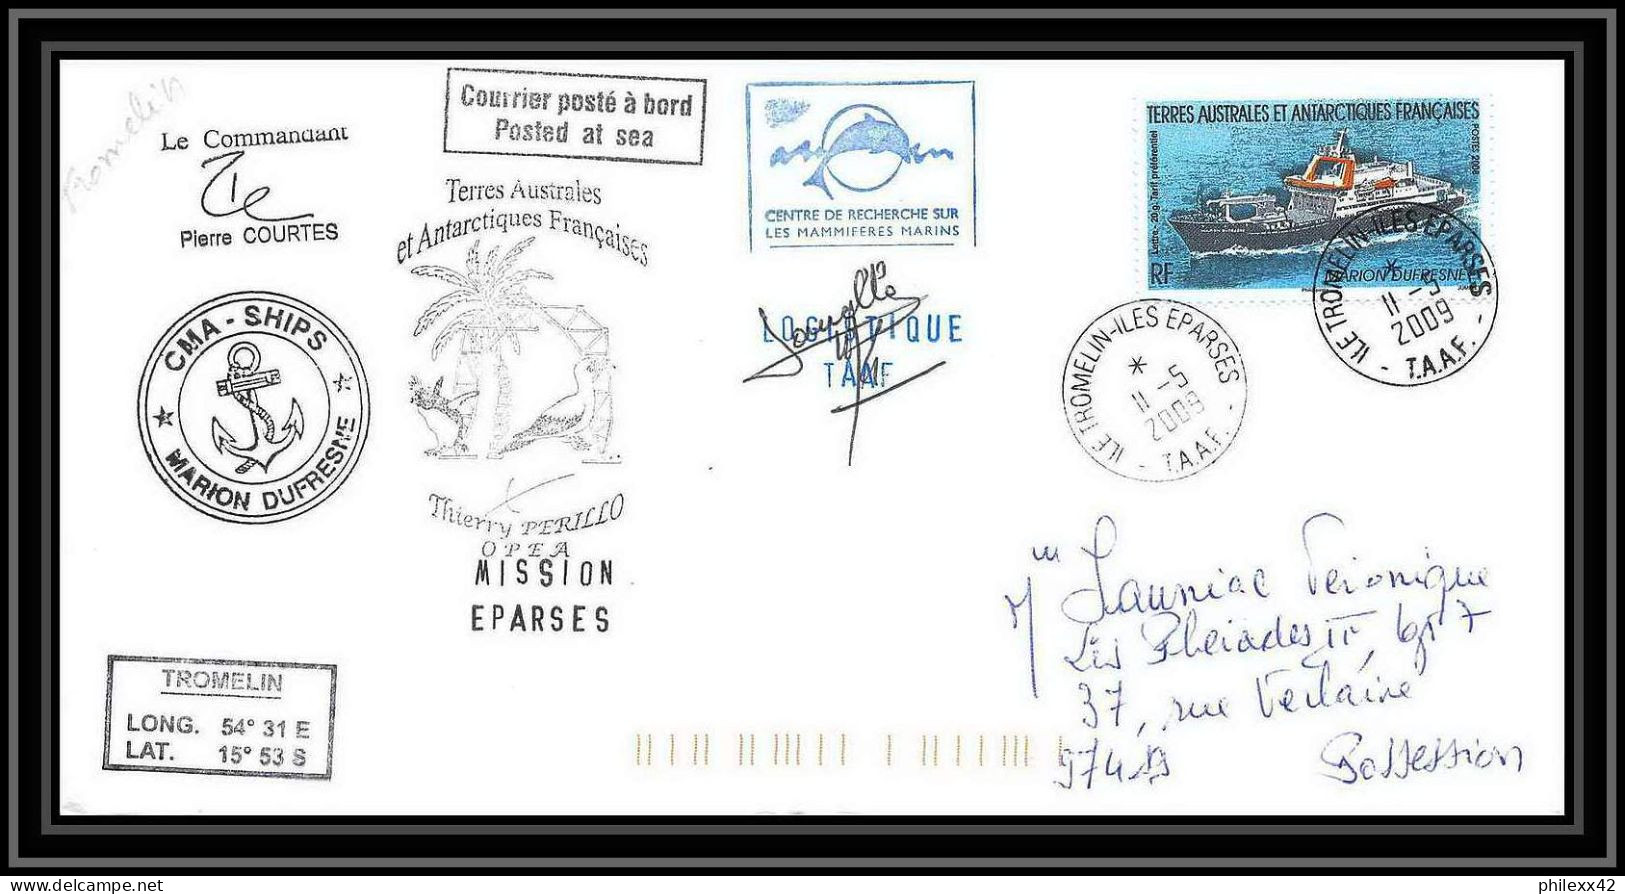 2912 Dufresne 2 Signé Signed Trommelin 11/5/2009 Mission Eparses N°520 ANTARCTIC Terres Australes (taaf) Lettre Cover - Covers & Documents